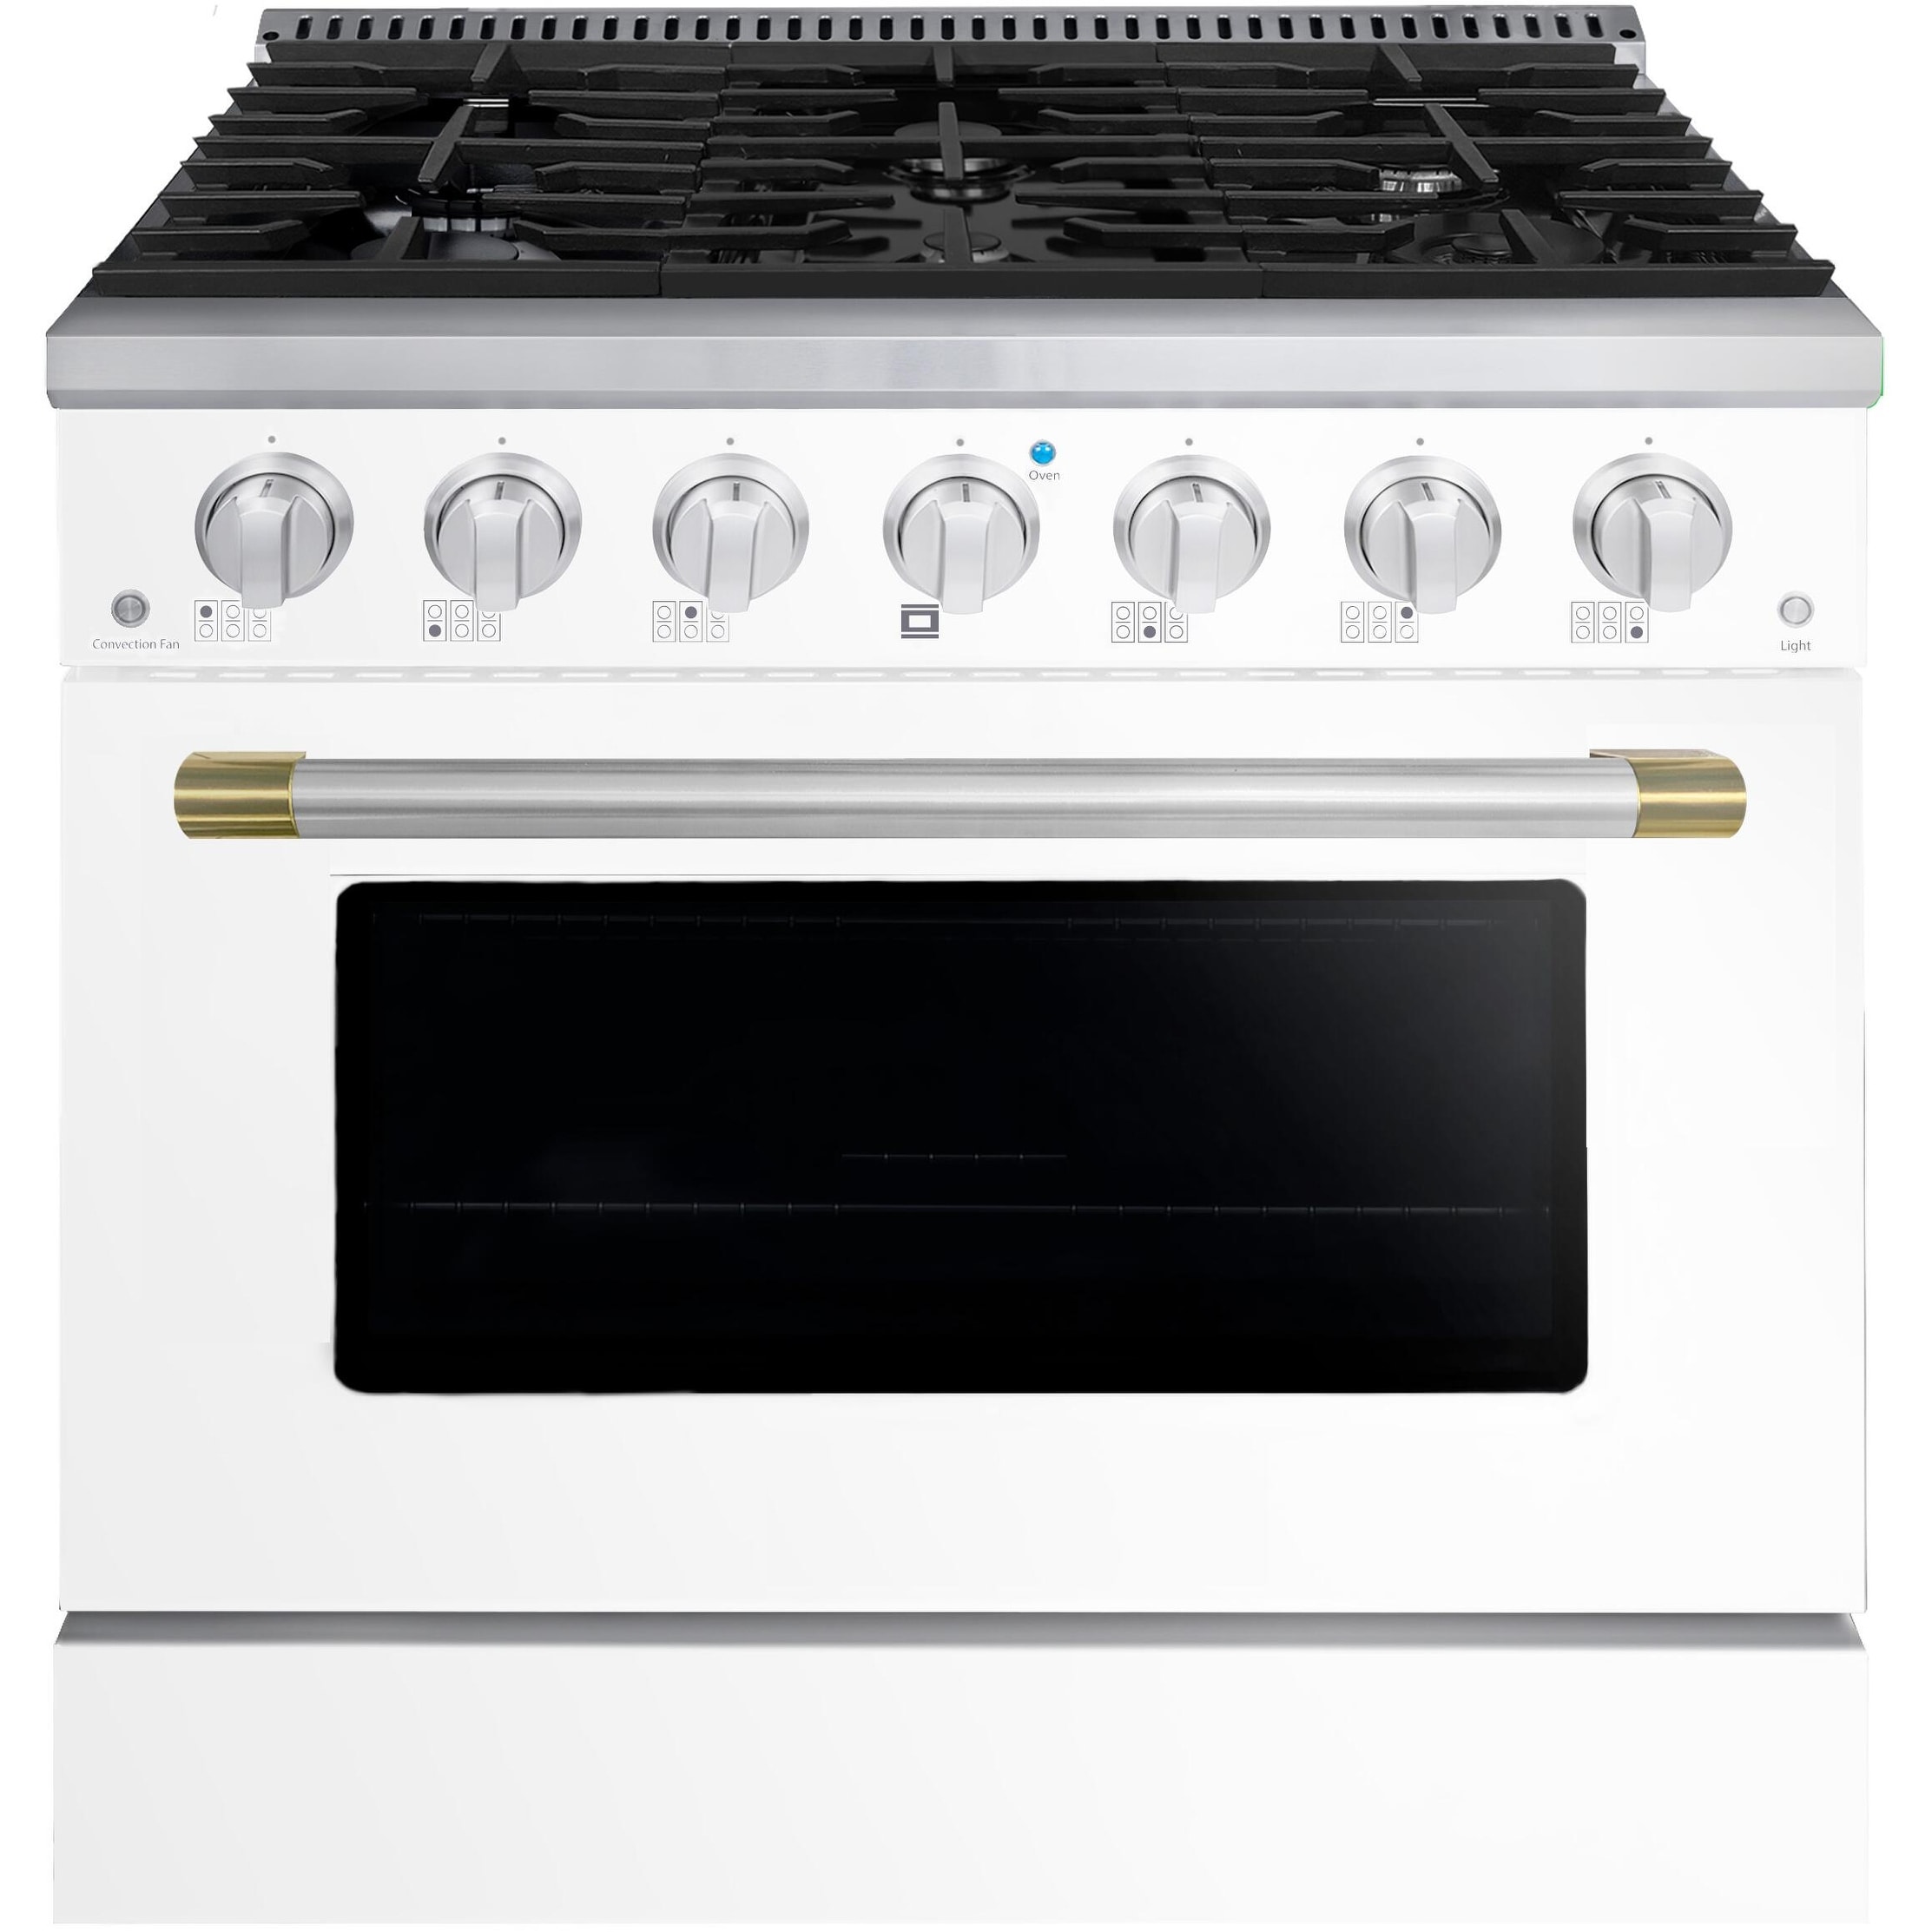 Forte 36 Inch Range in White with Stainless Steel Trim Option 1